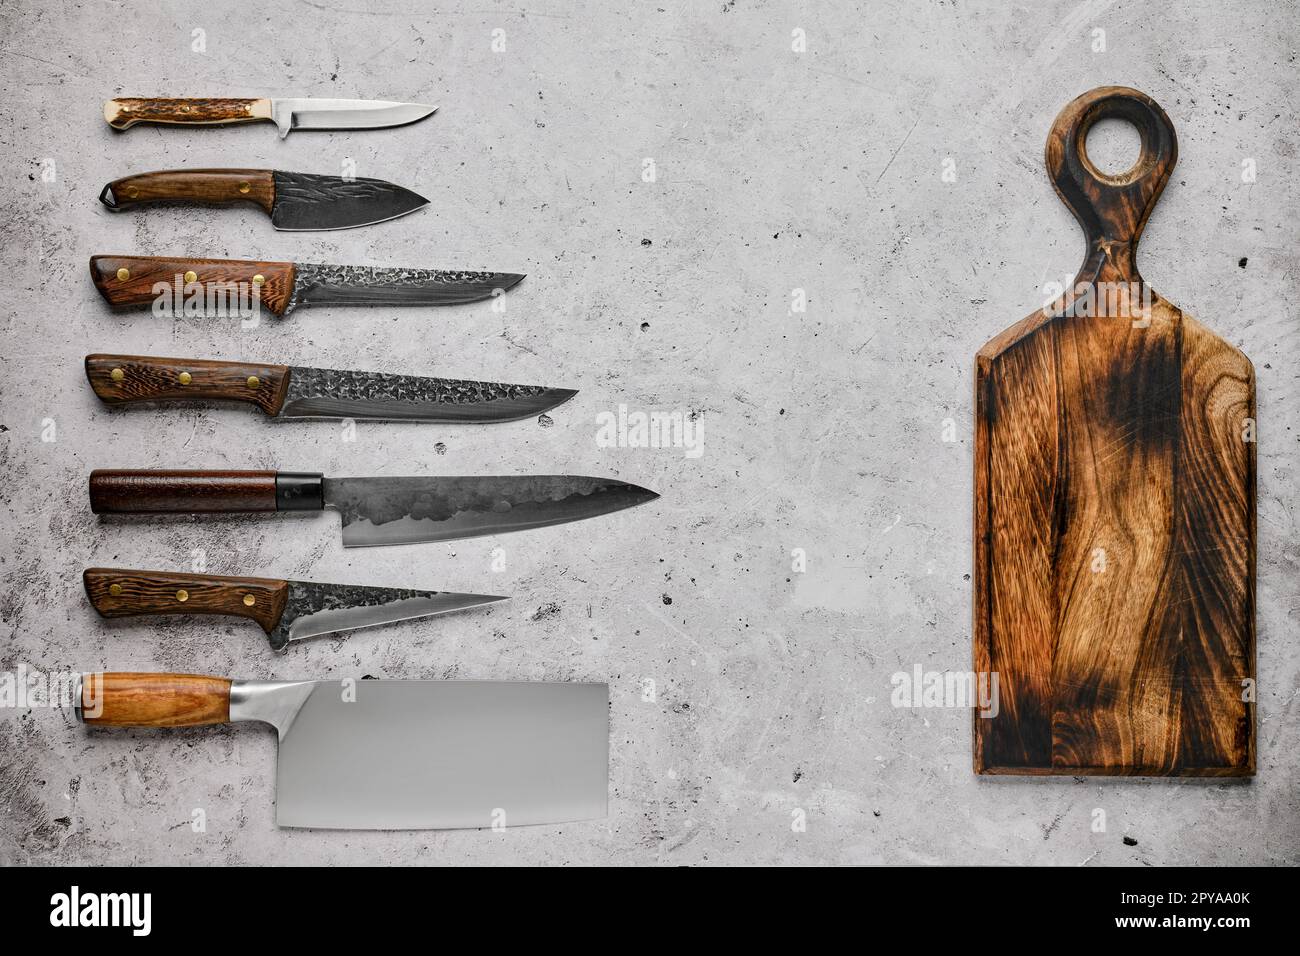 https://c8.alamy.com/comp/2PYAA0K/different-kinds-of-knives-and-cutting-board-2PYAA0K.jpg